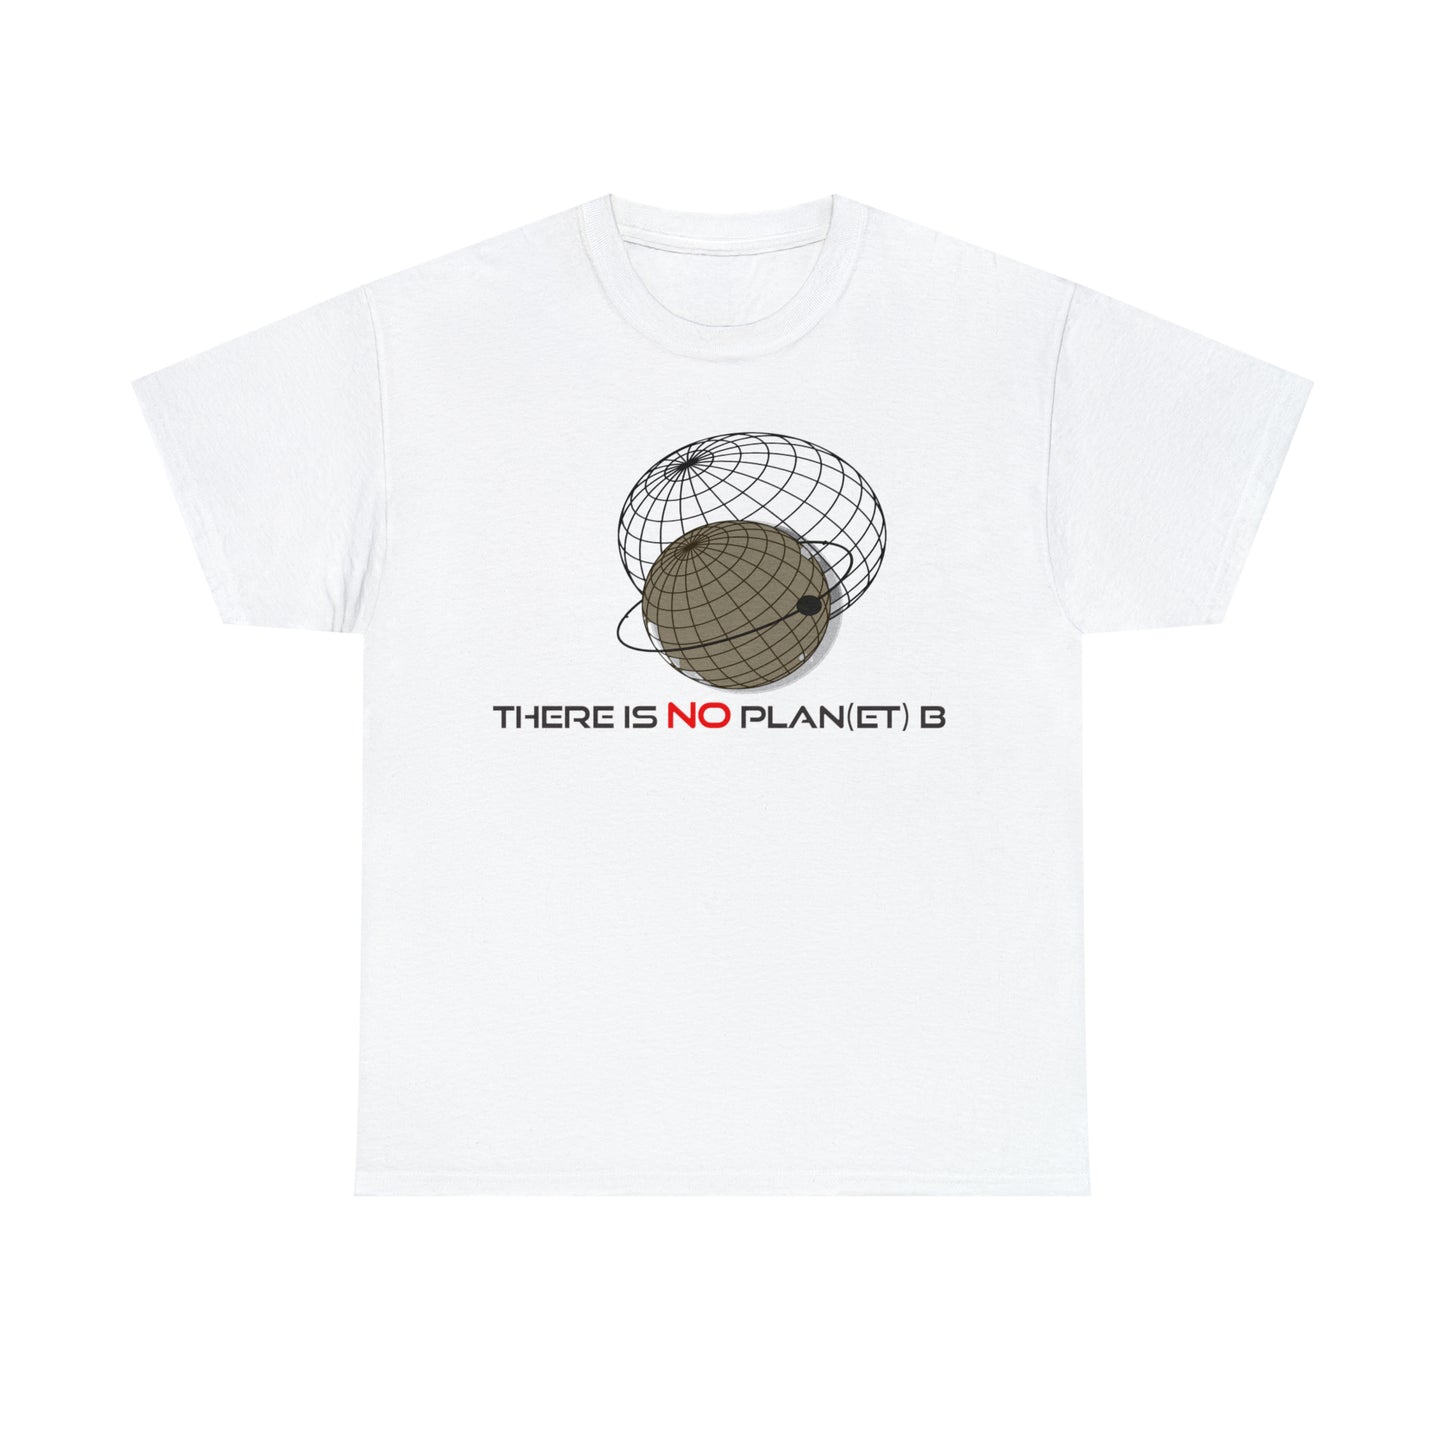 There is no Planet B Tee